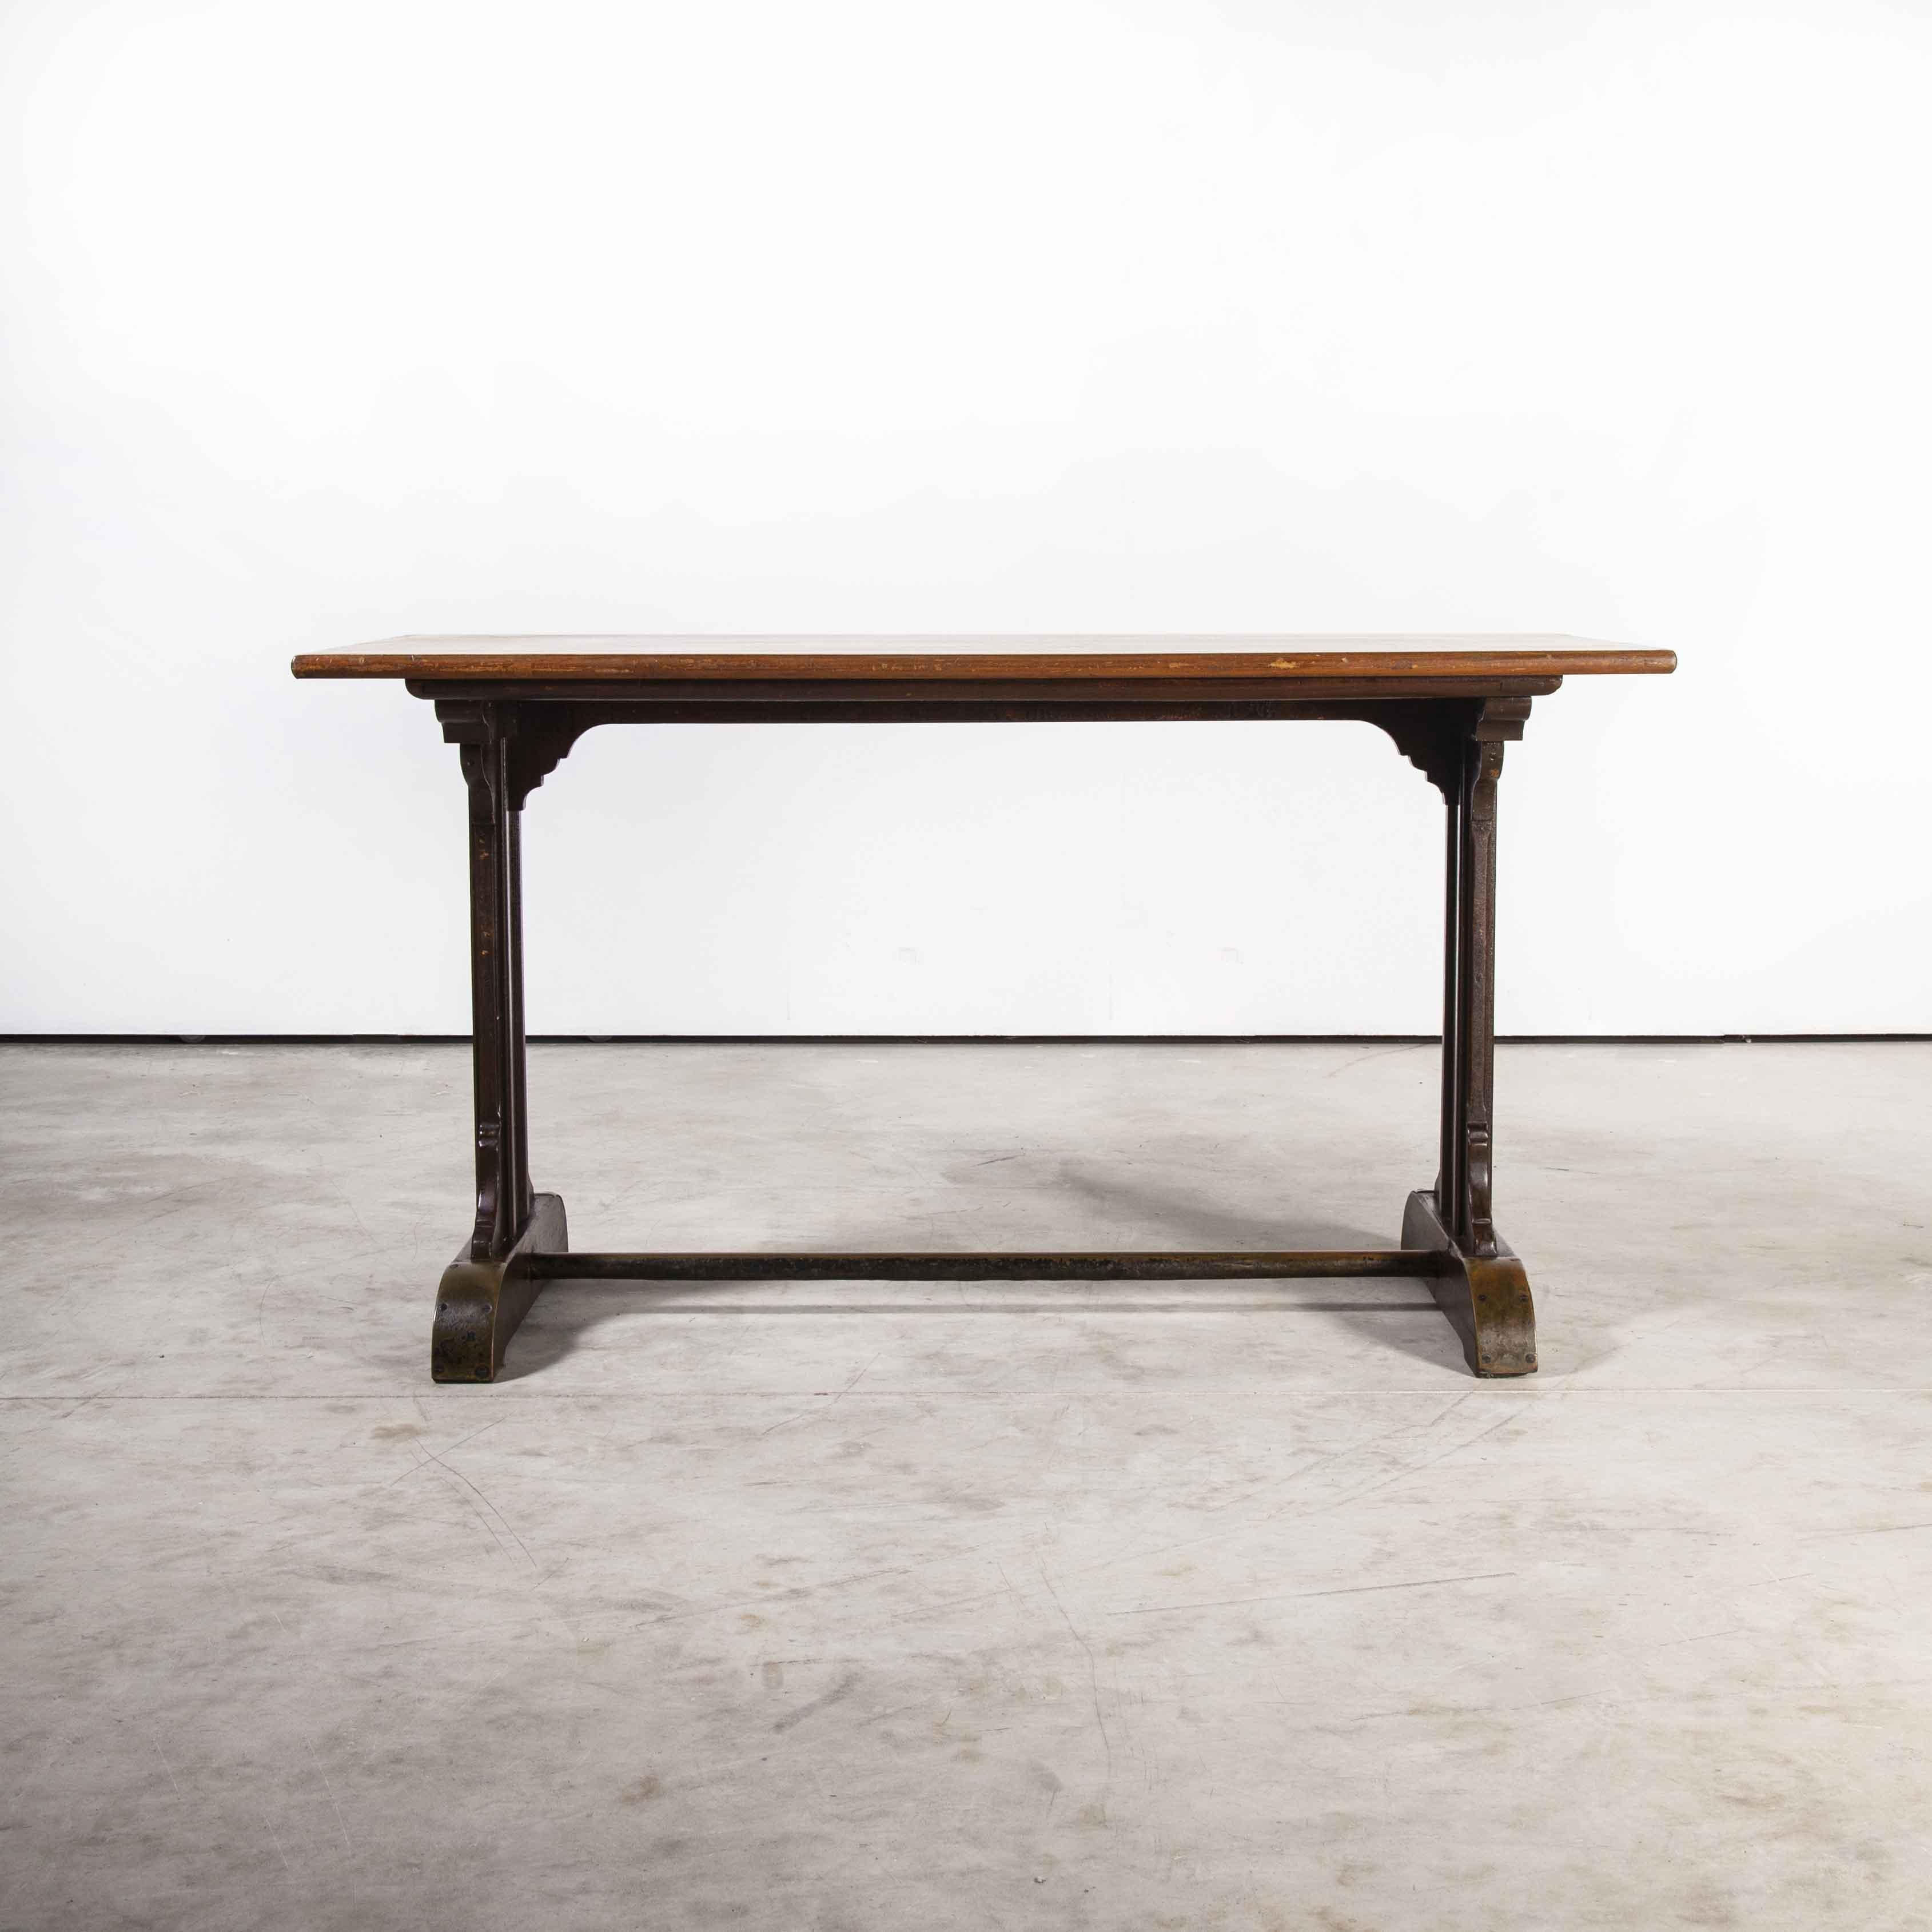 1930's Original French Café Table, Rectangular Dining Table 'Model 1114.1' For Sale 5